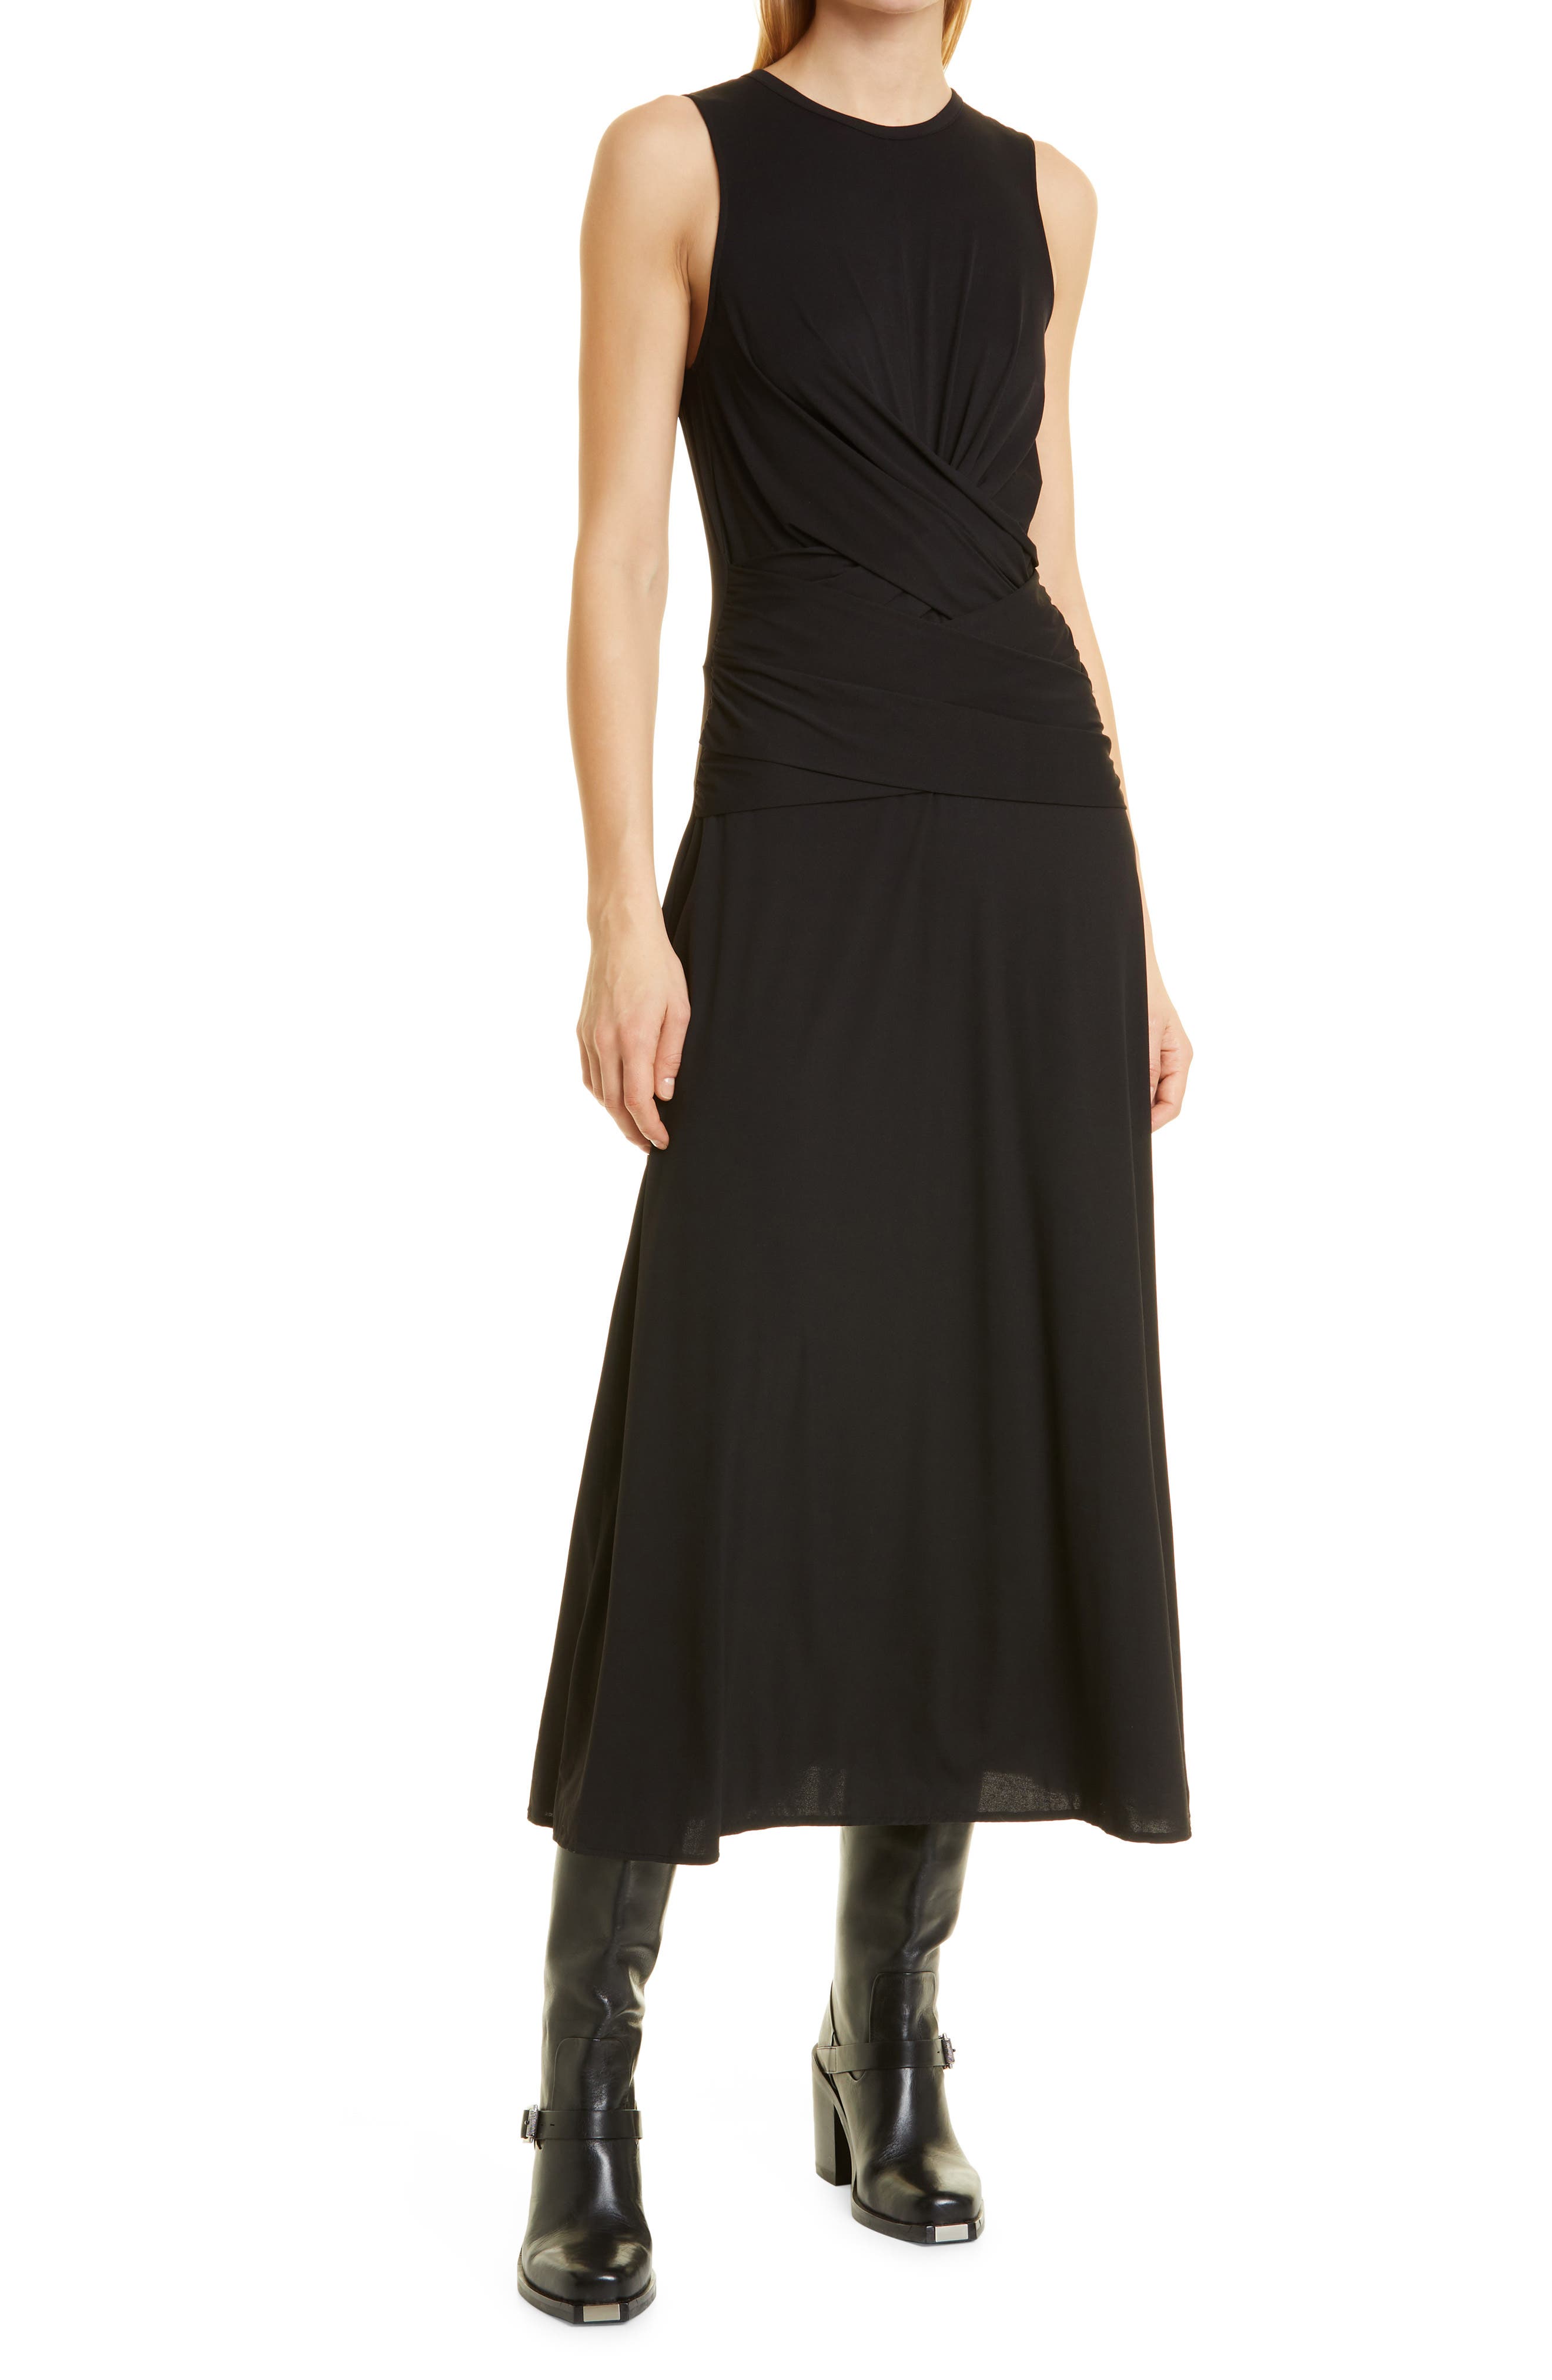 rag & bone Rose Wrap Front Sleeveless Dress in Black at Nordstrom, Size Xx-Small